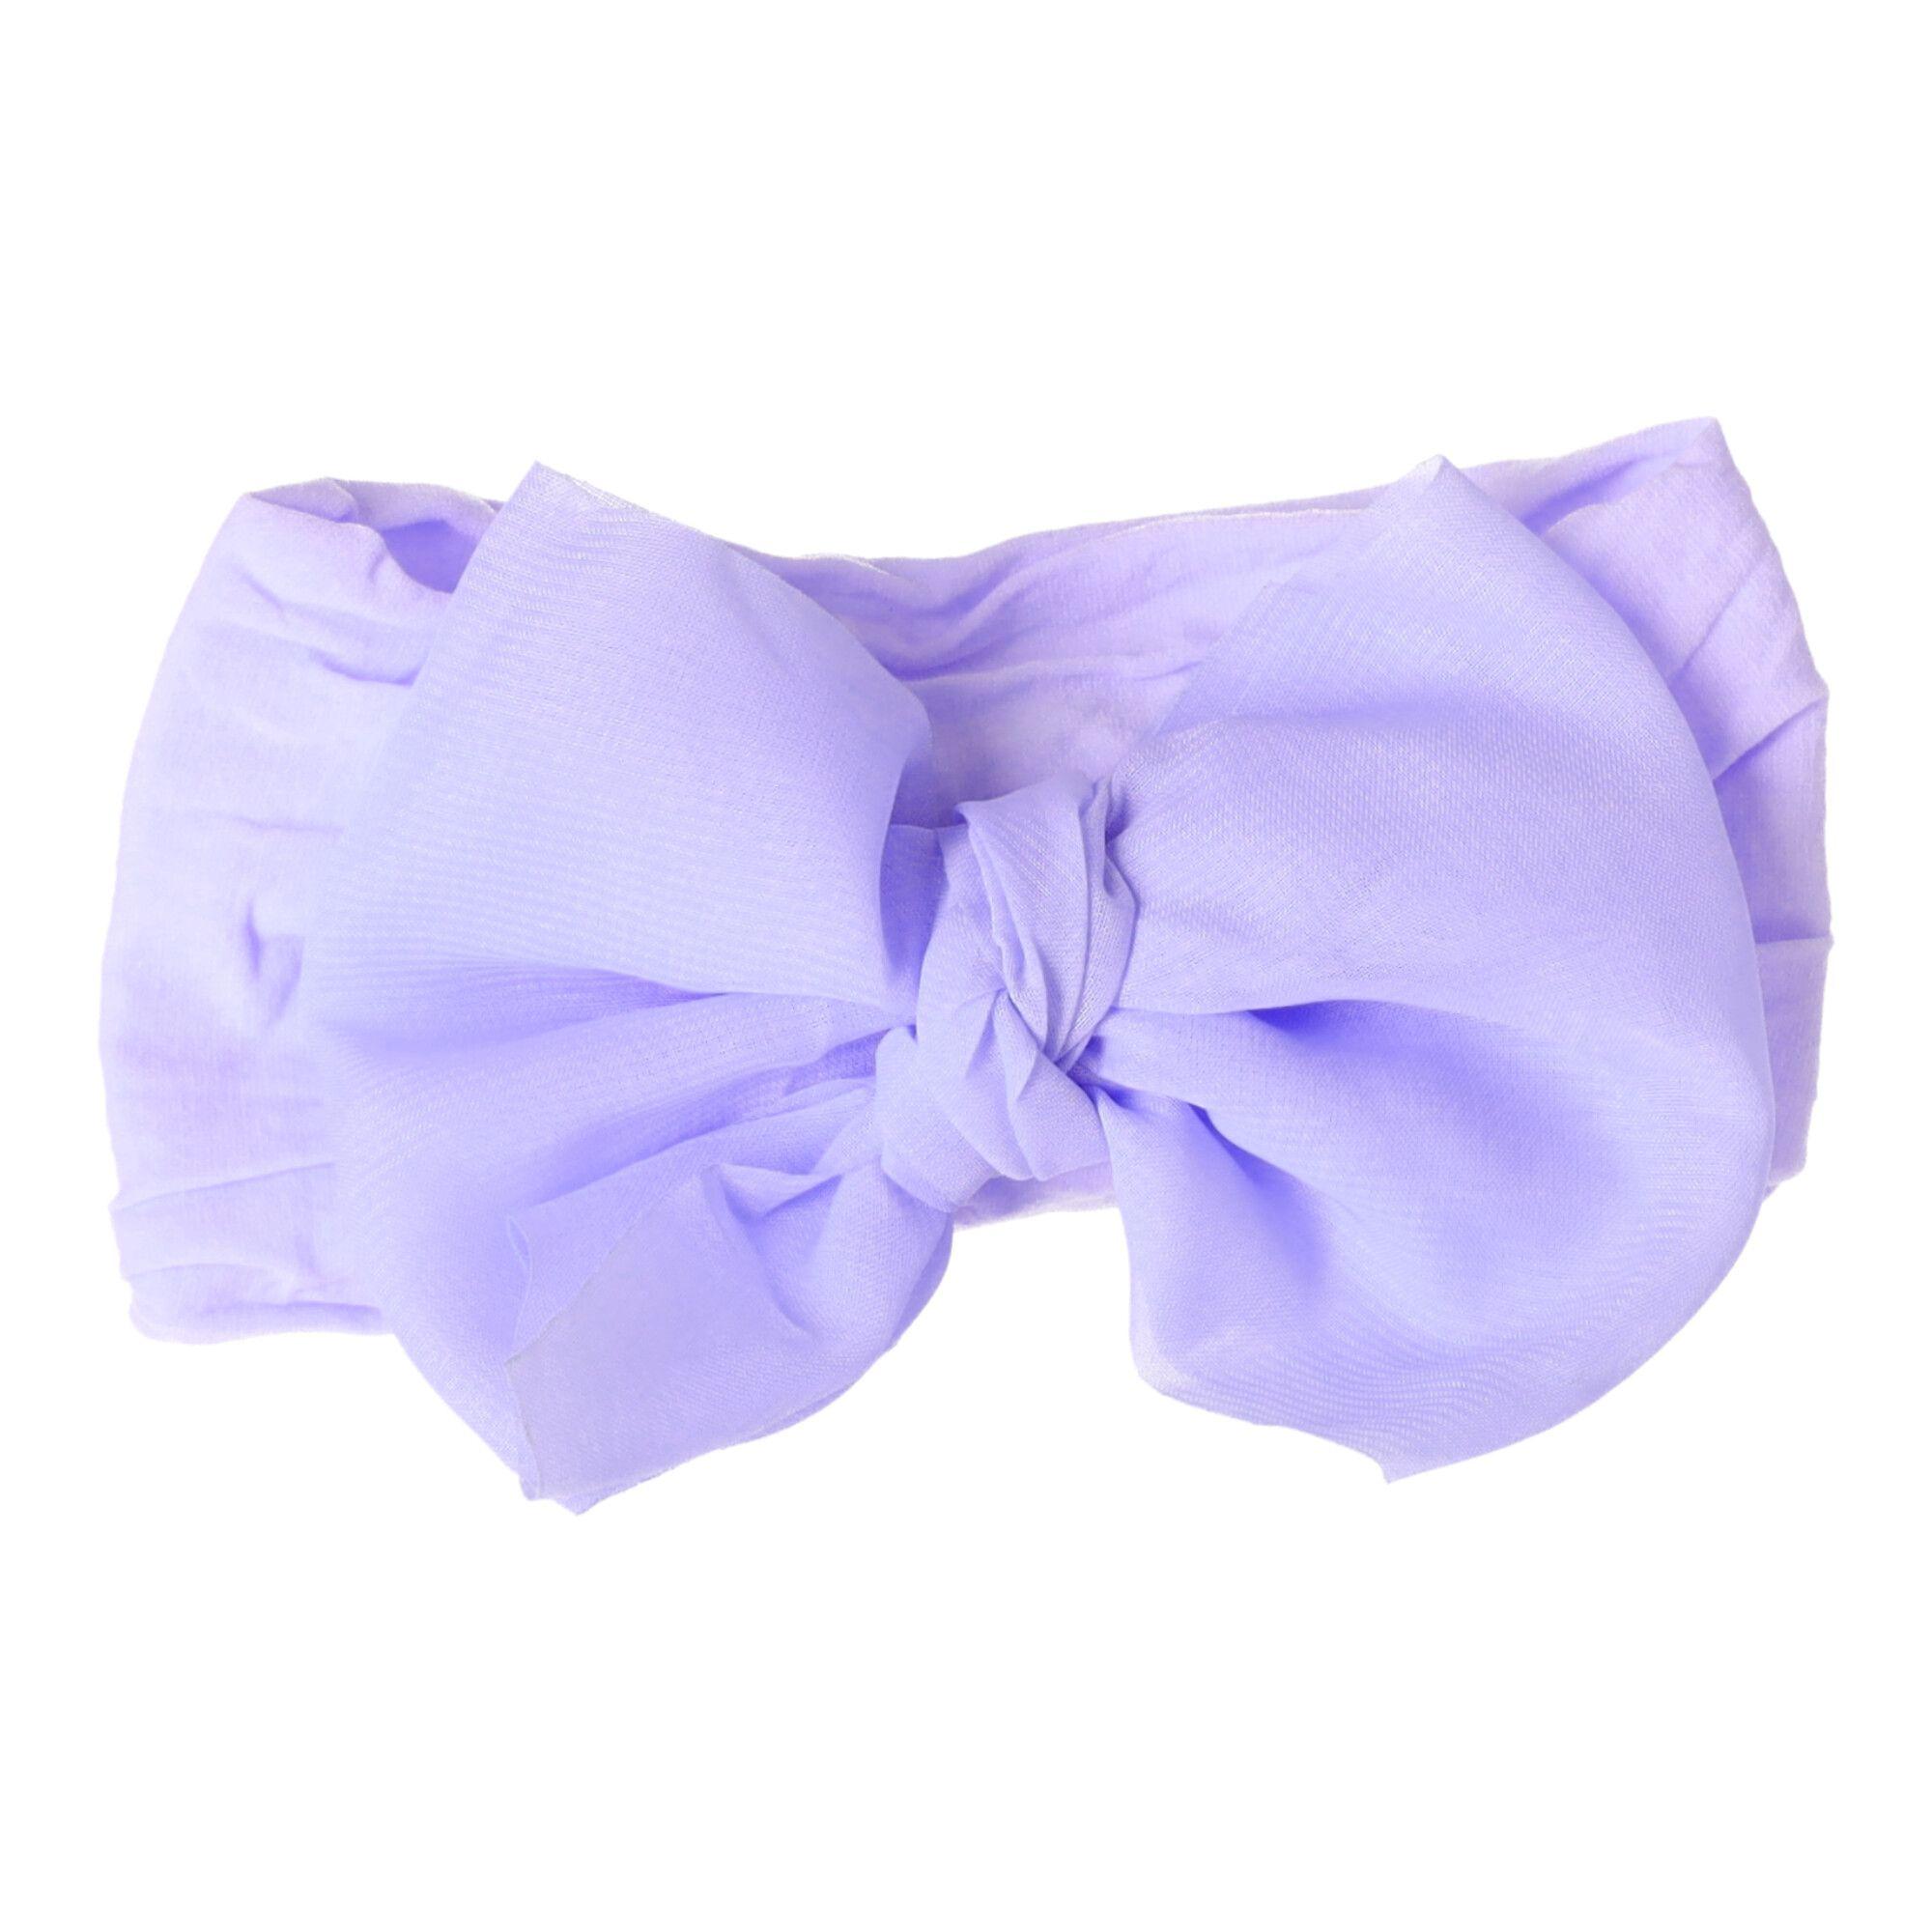 Baby headband with a bow - purple, wide